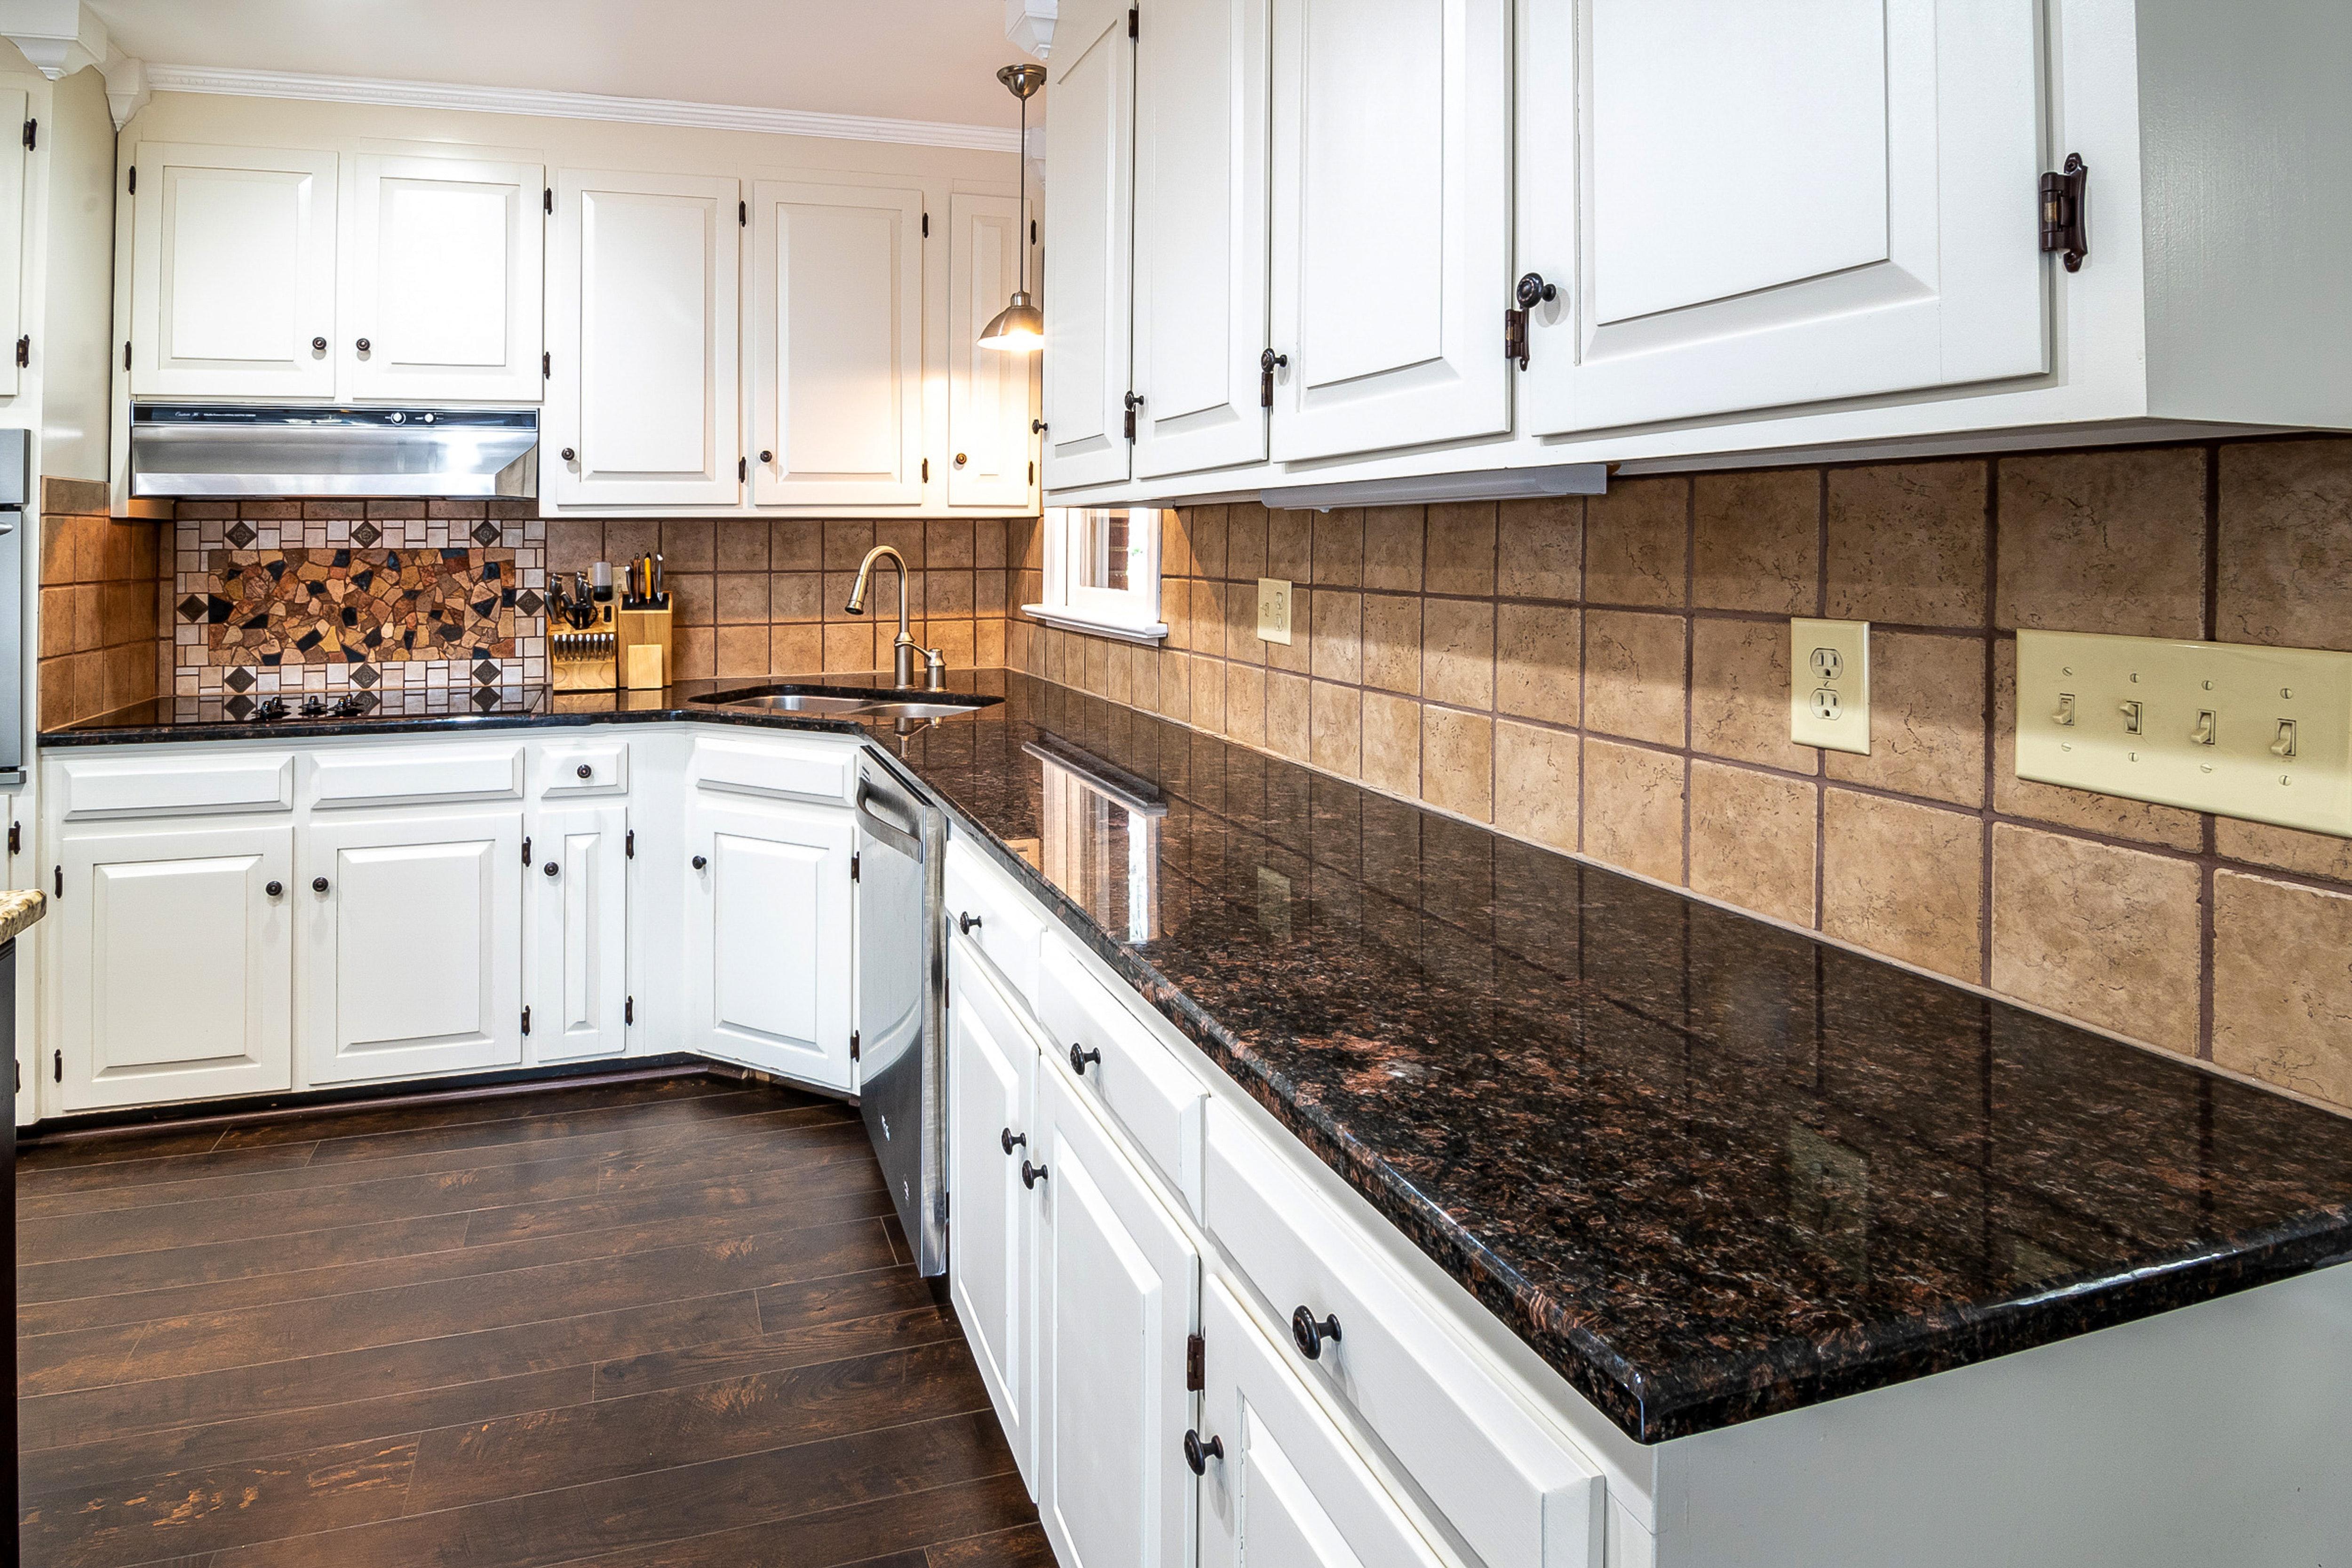  How Are Granite Countertops Attached To Cabinets 